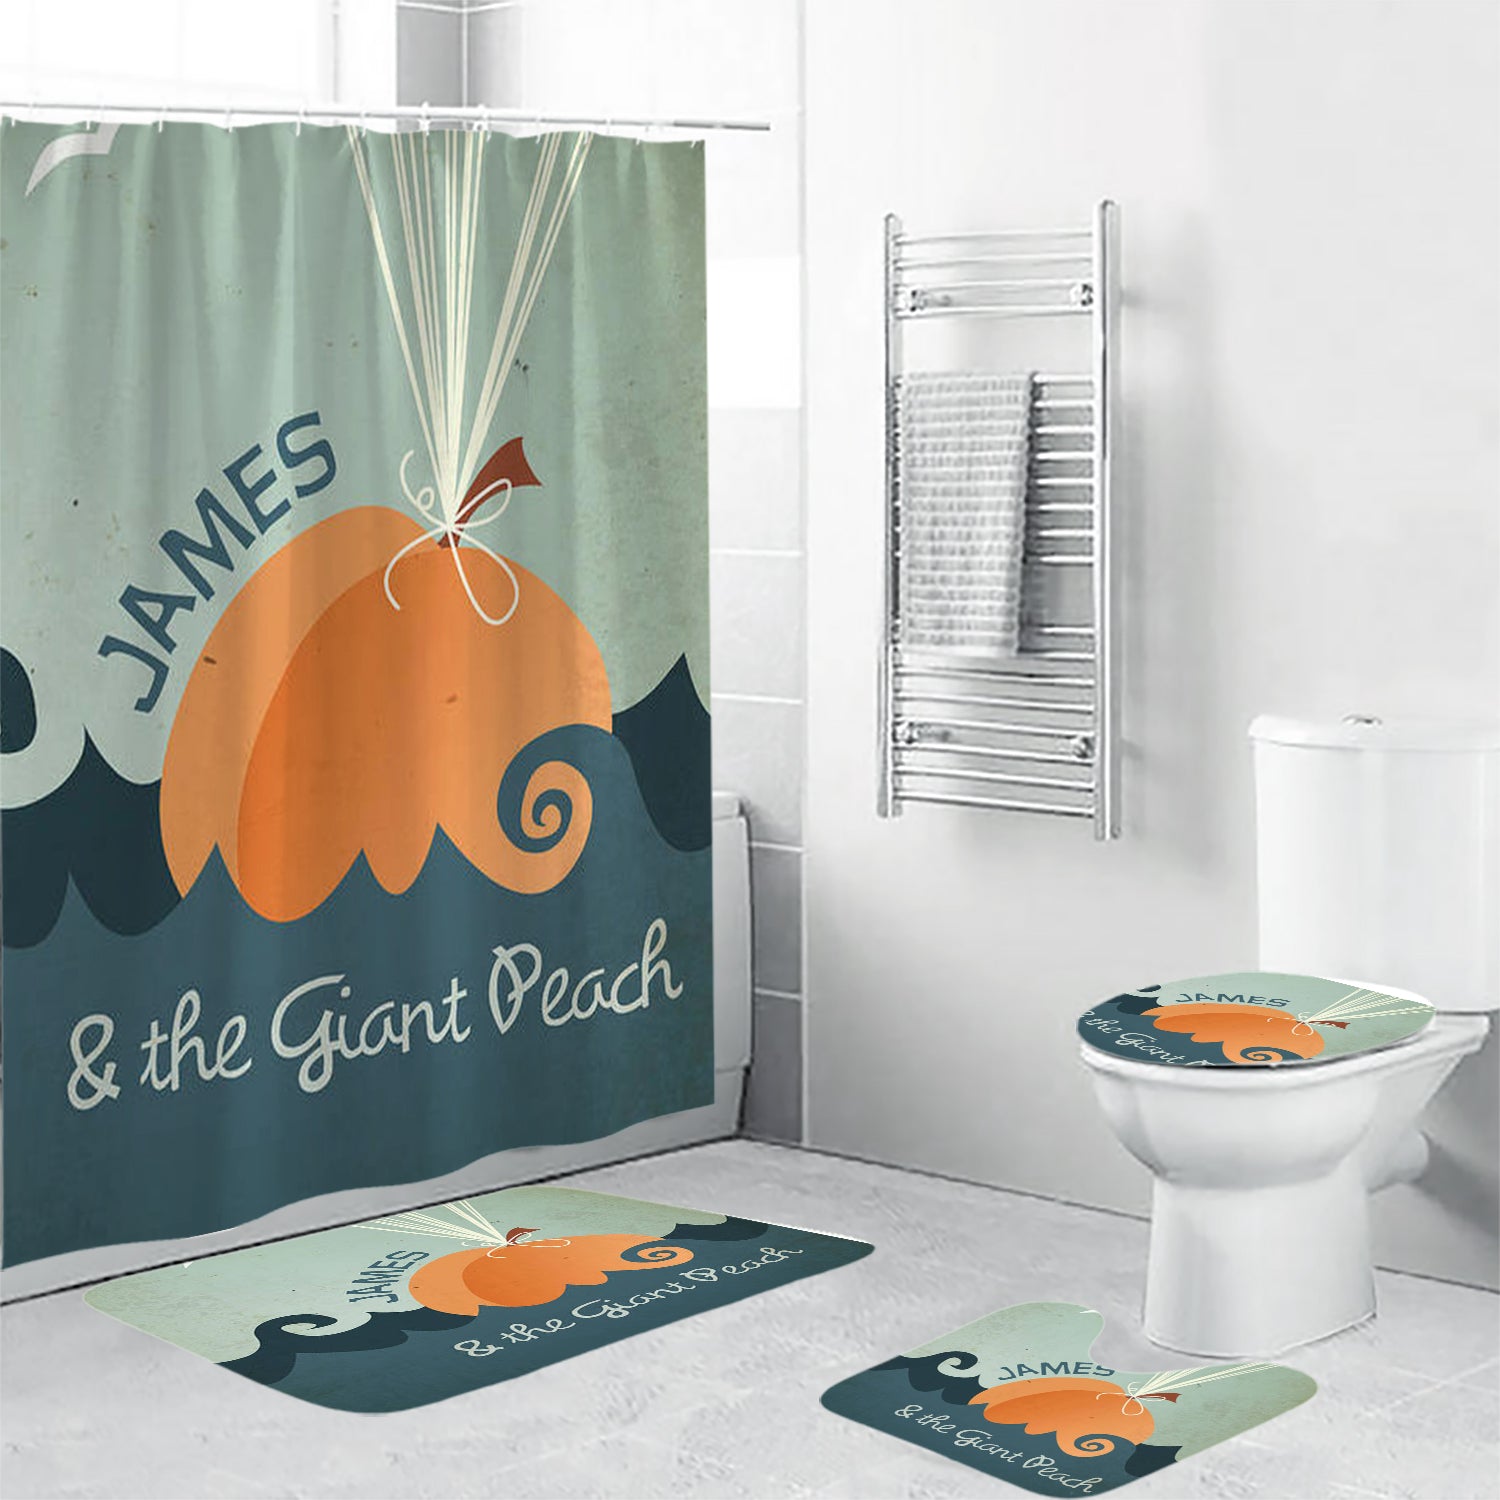 James and the Giant Peach Poster 9 4PCS Shower Curtain Non-Slip Toilet Lid Cover Bath Mat - Bathroom Set Fans Gifts